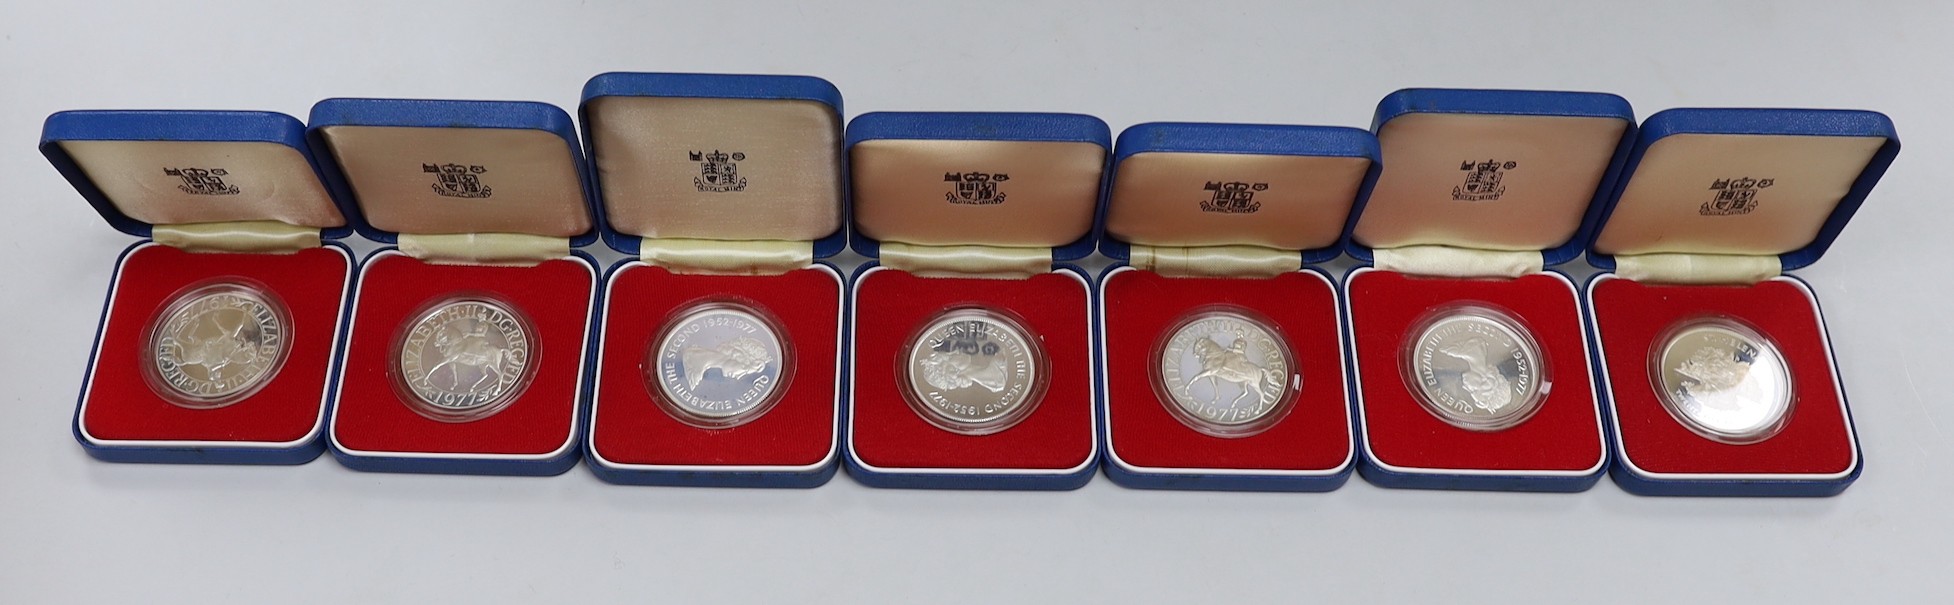 Royal Mint proof silver coins - three QEII UK Silver Jubilee crowns and four Commonwealth crowns (